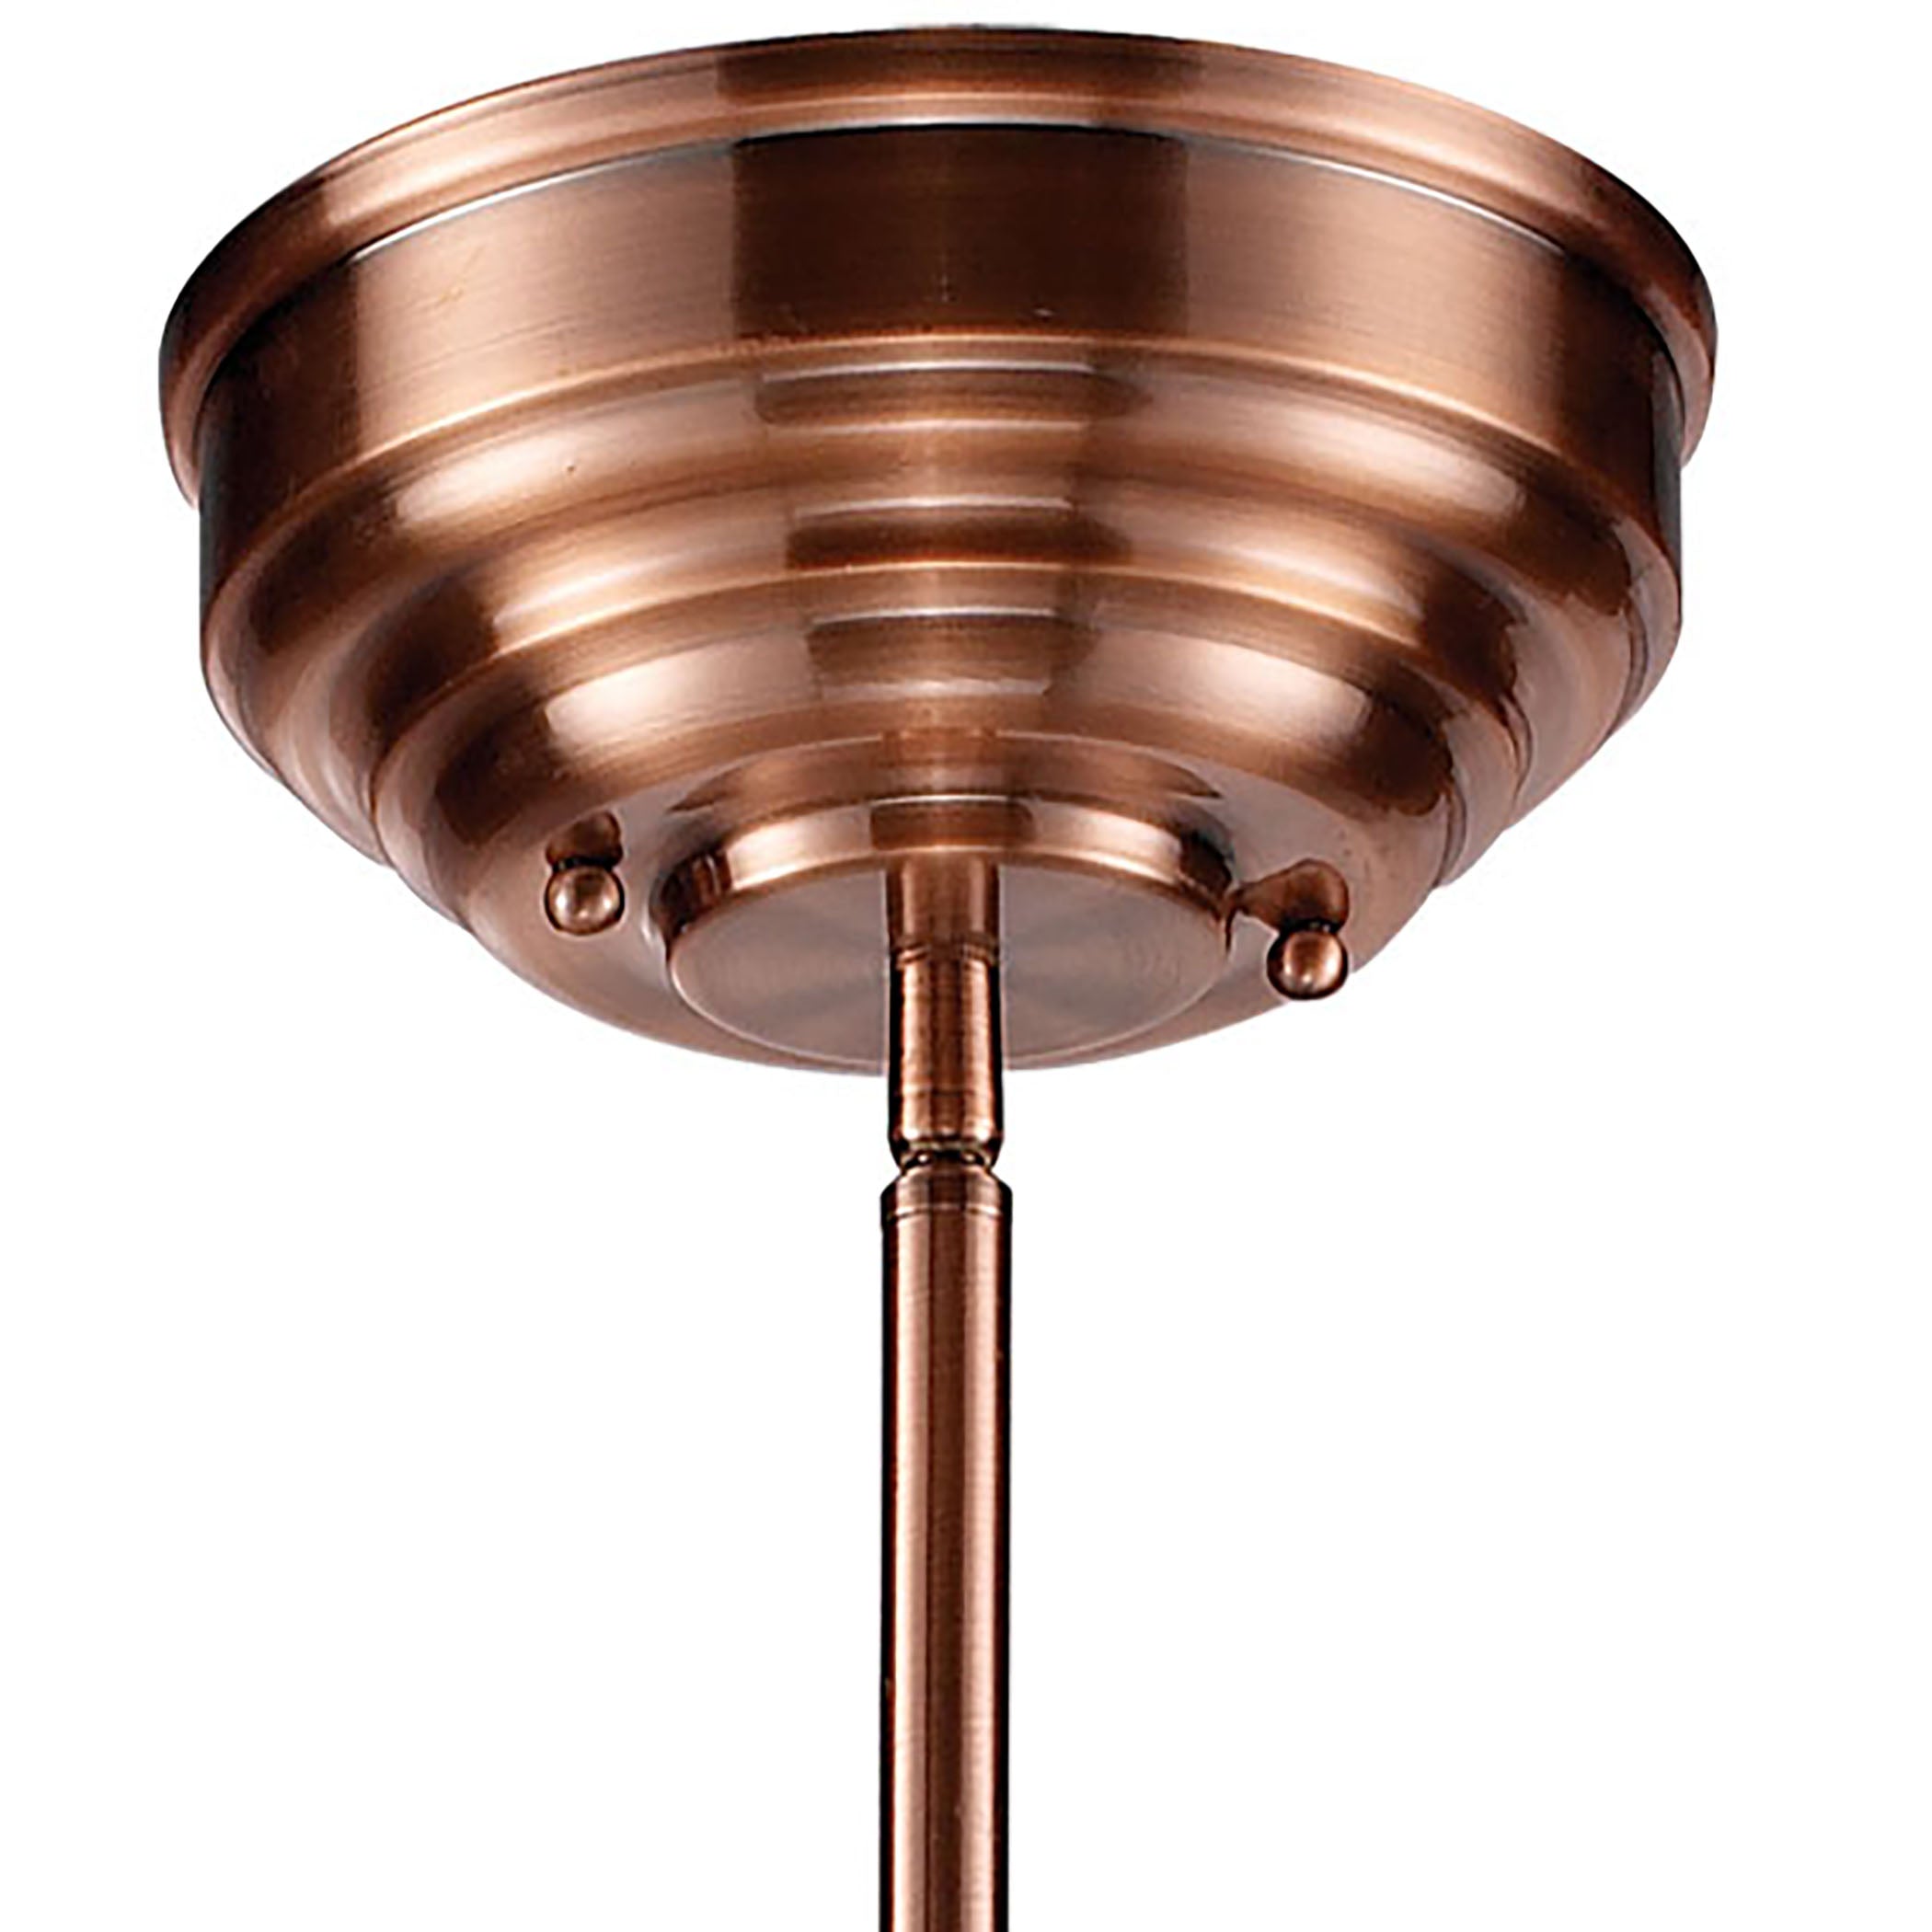 ELK Lighting 66145-3 Chadwick 3-Light Island Light in Antique Copper with Matching Shade